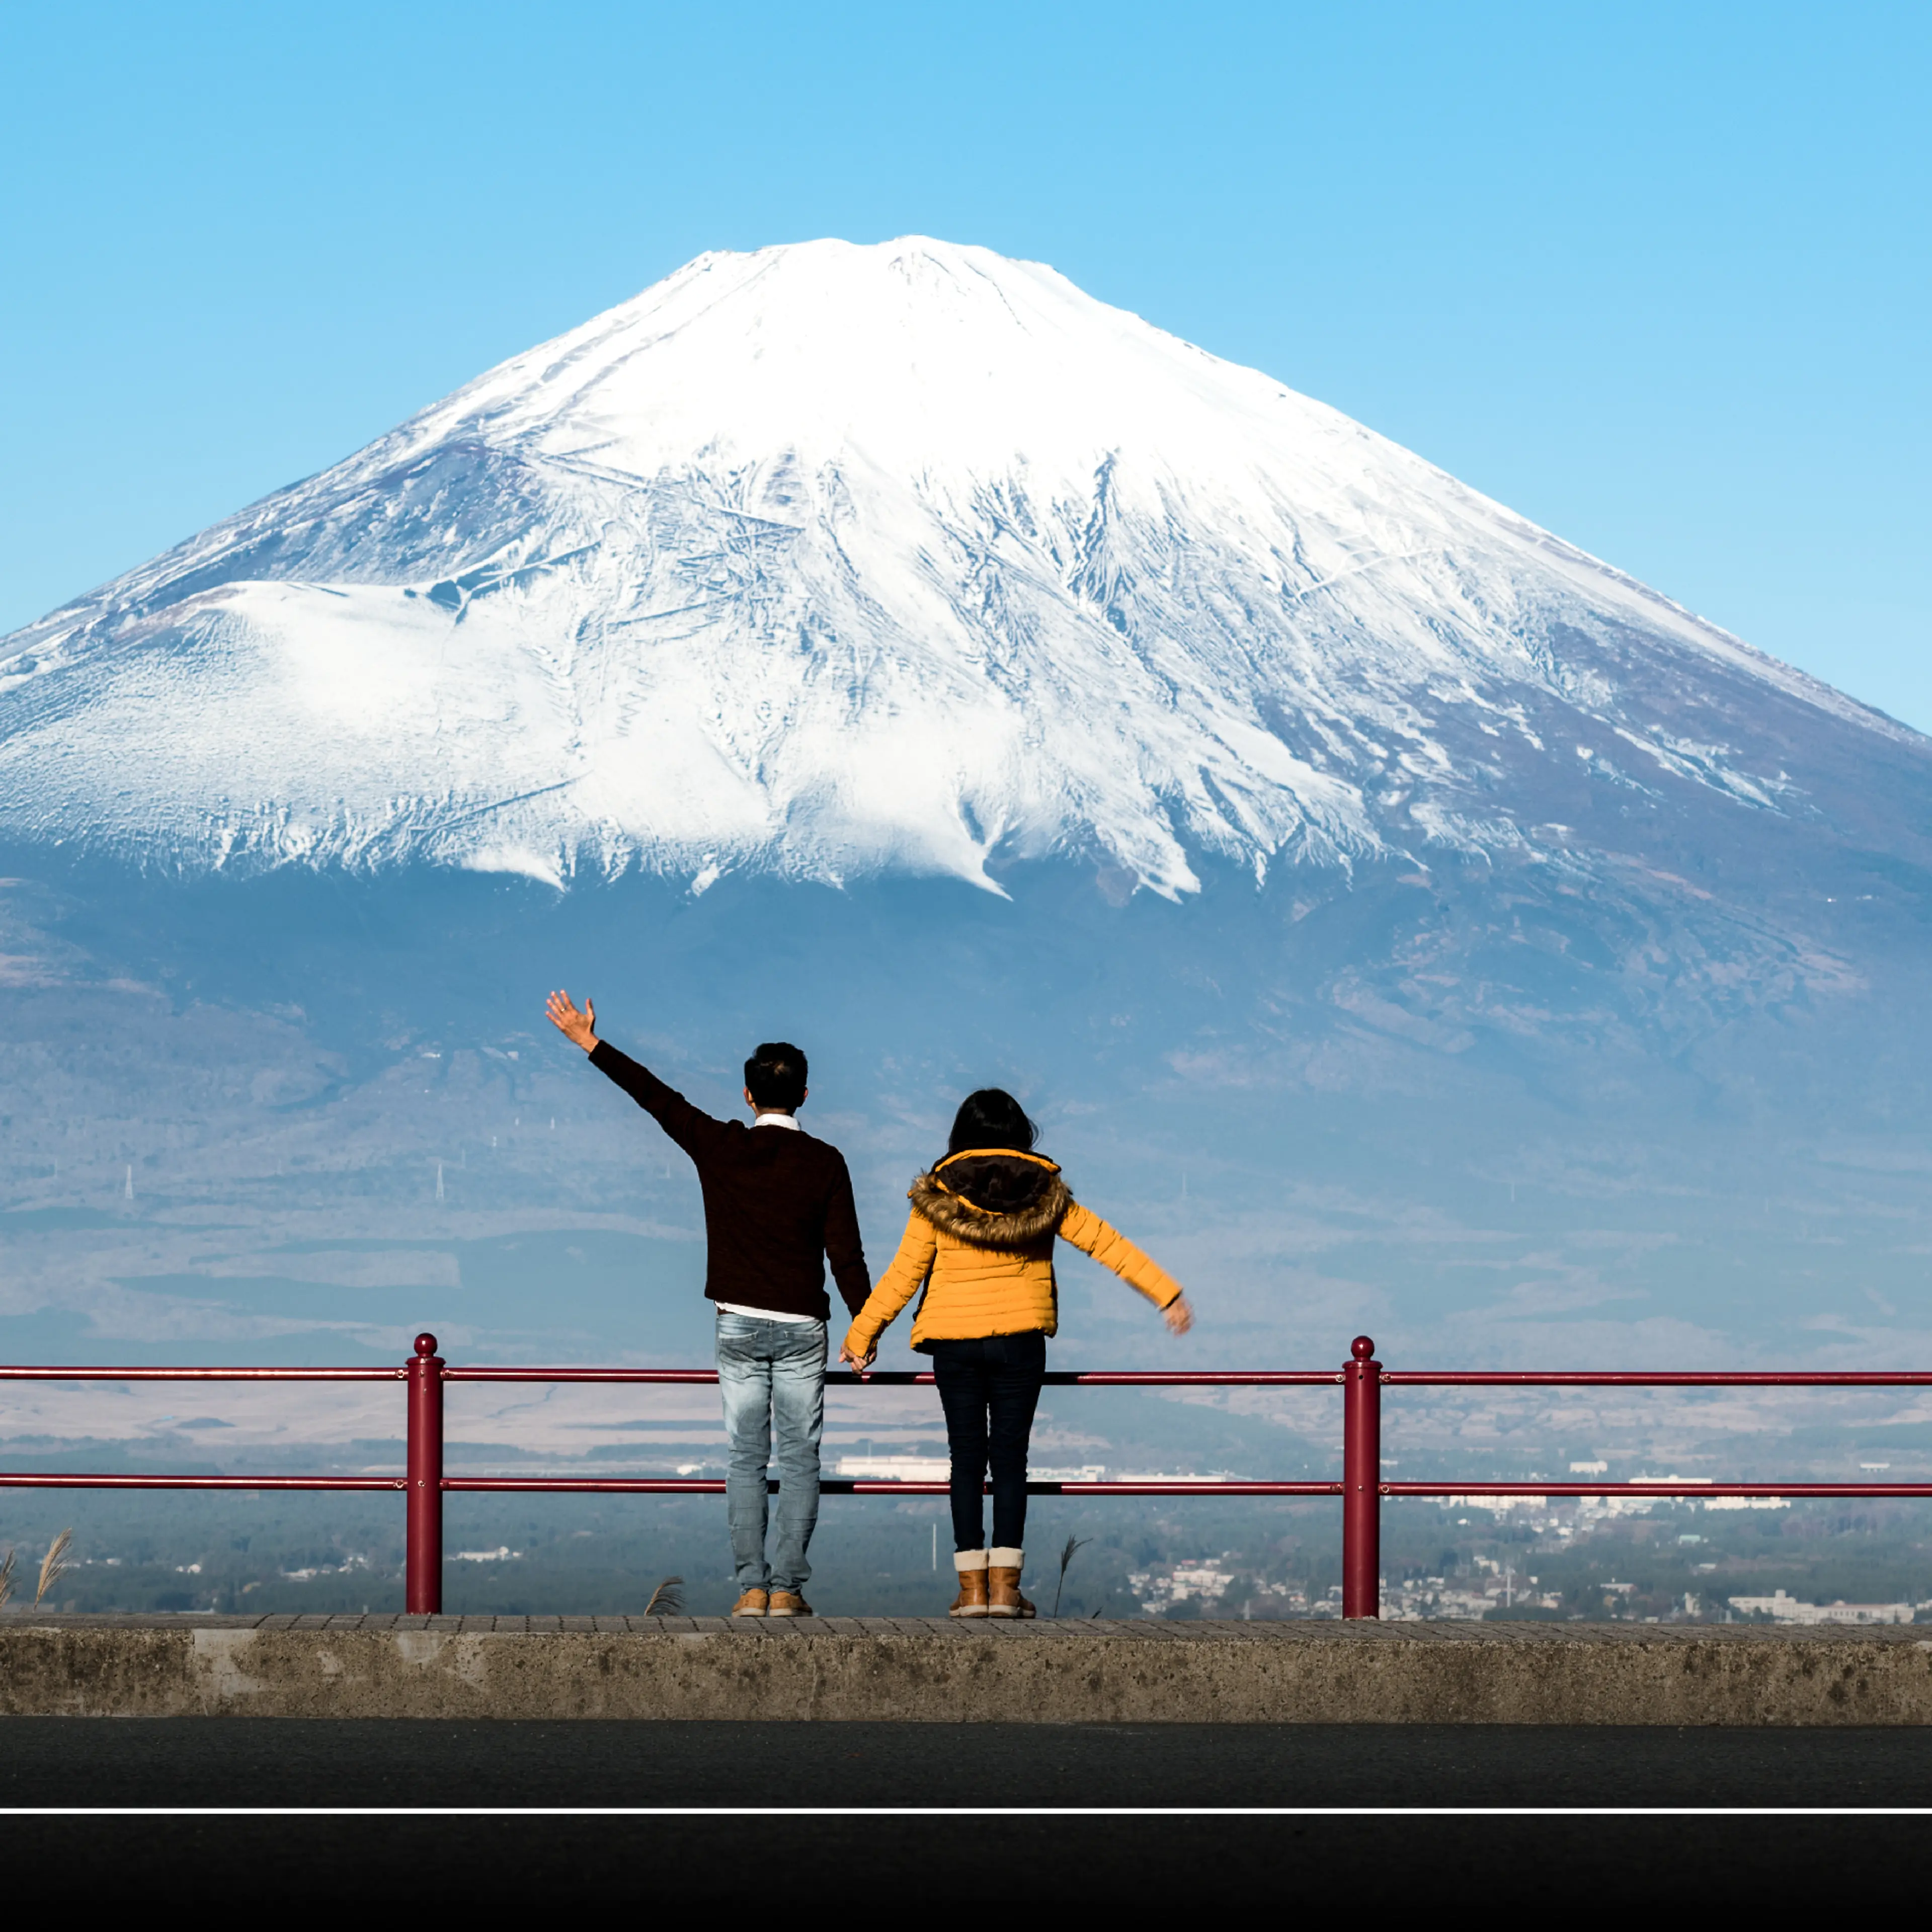 Travelling to Japan? 5 spots that give breathtaking views of Mt Fuji
